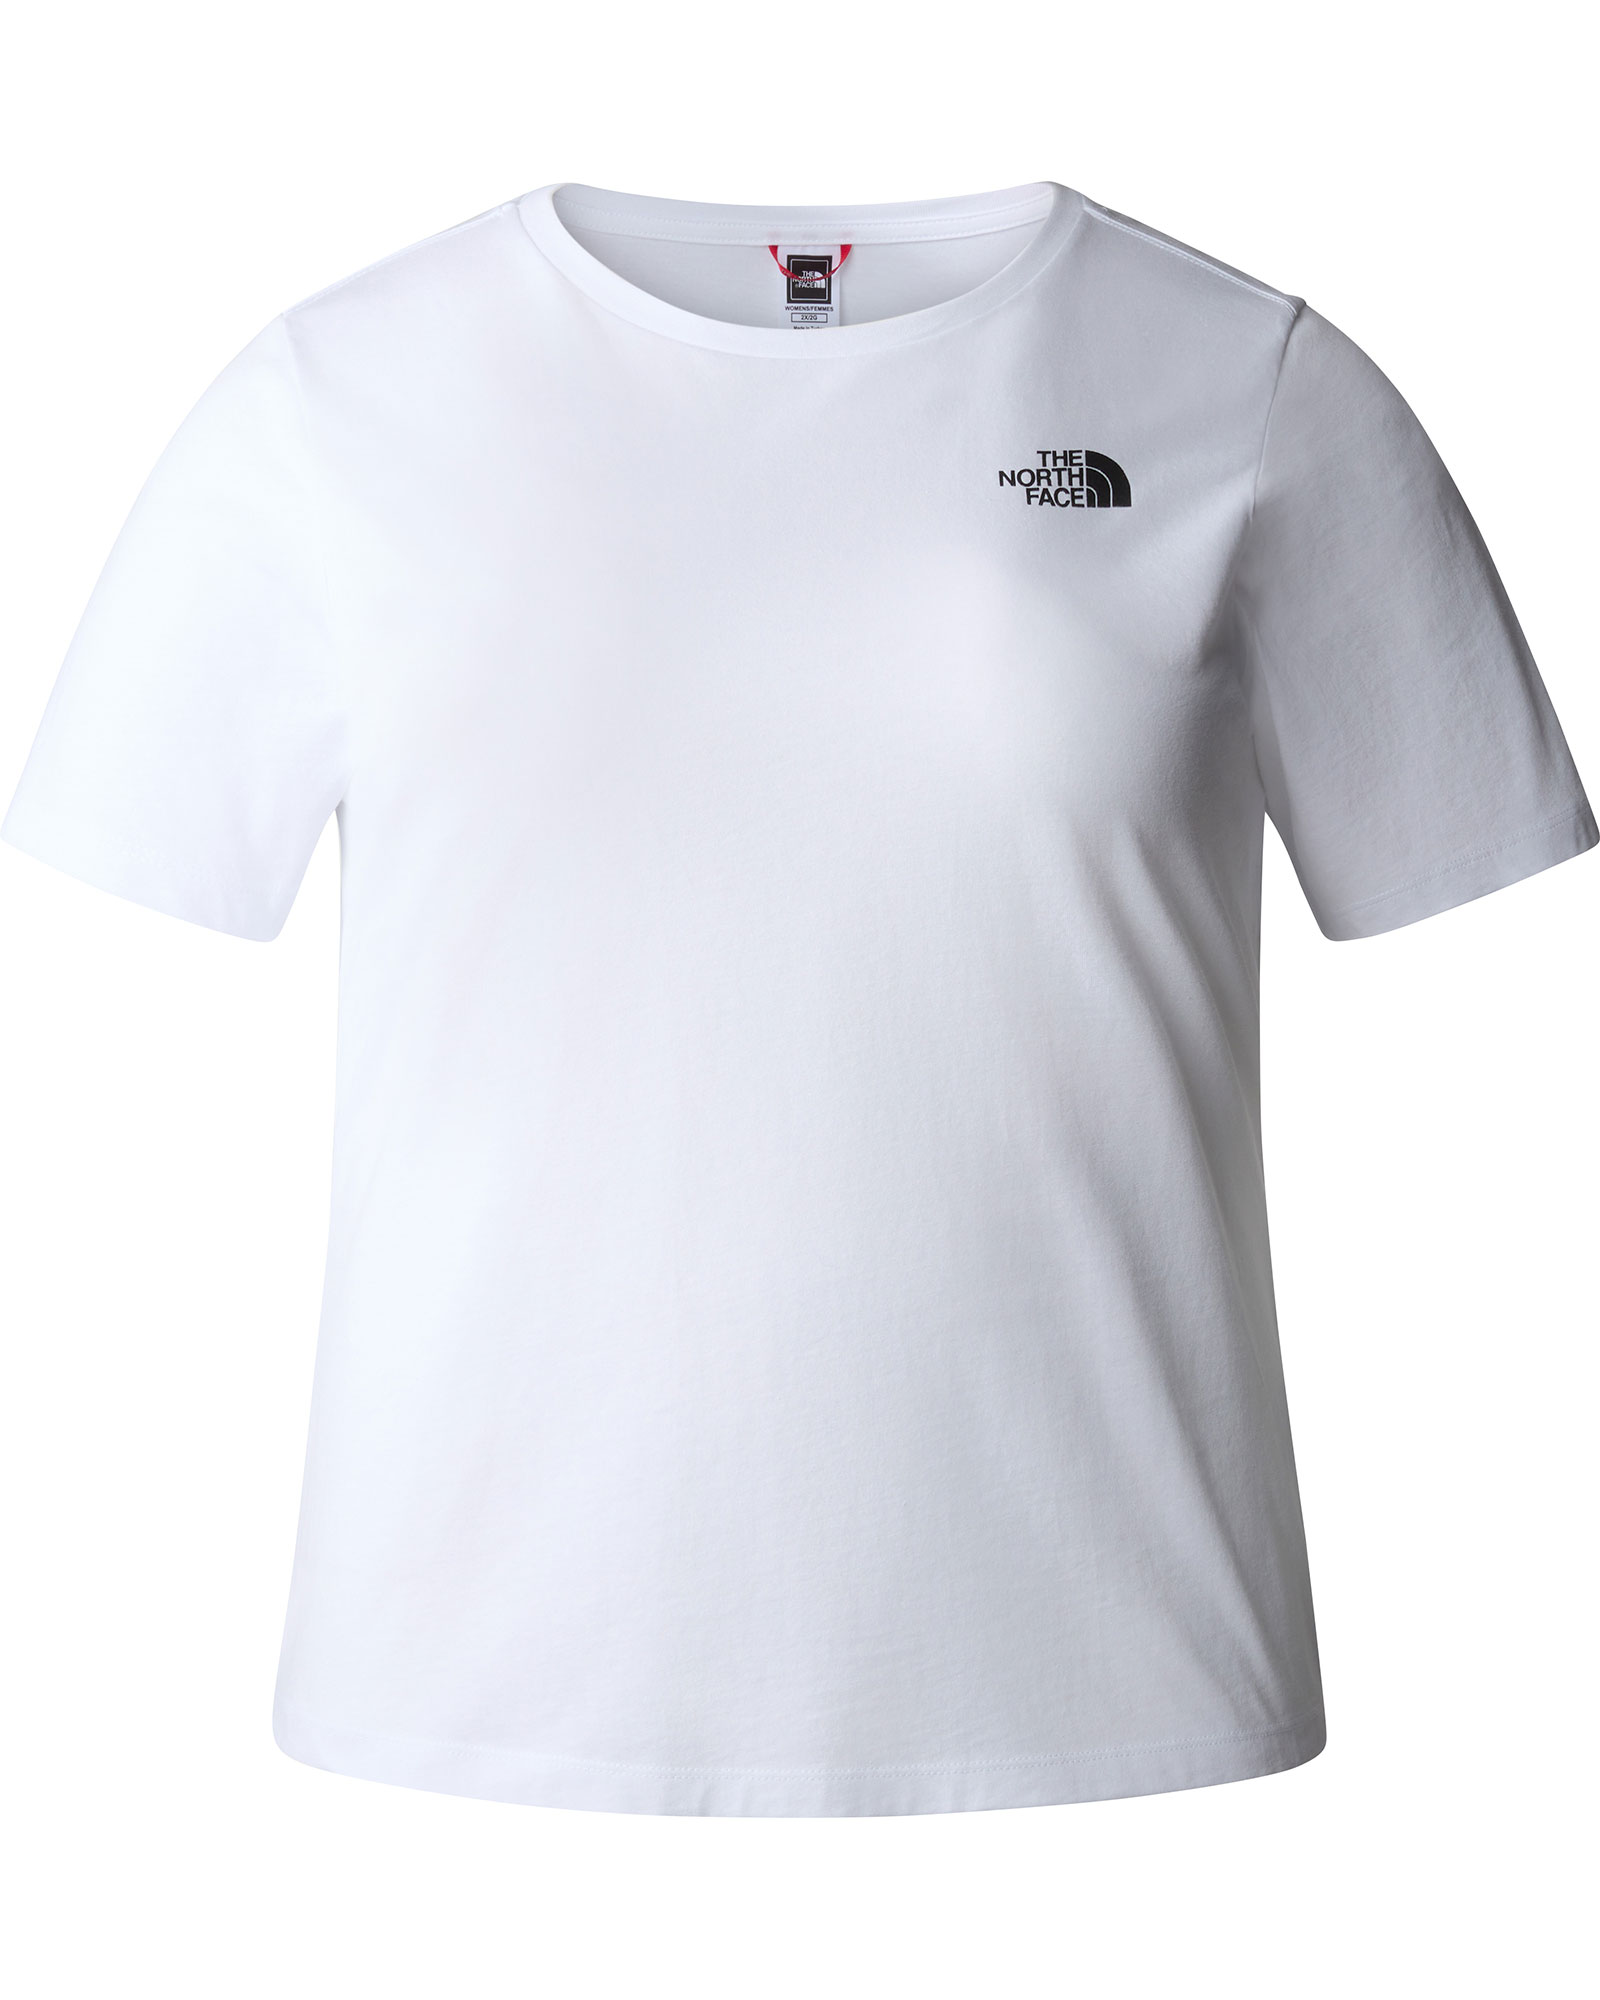 The North Face Plus Simple Dome Women’s T Shirt - TNF White 2X